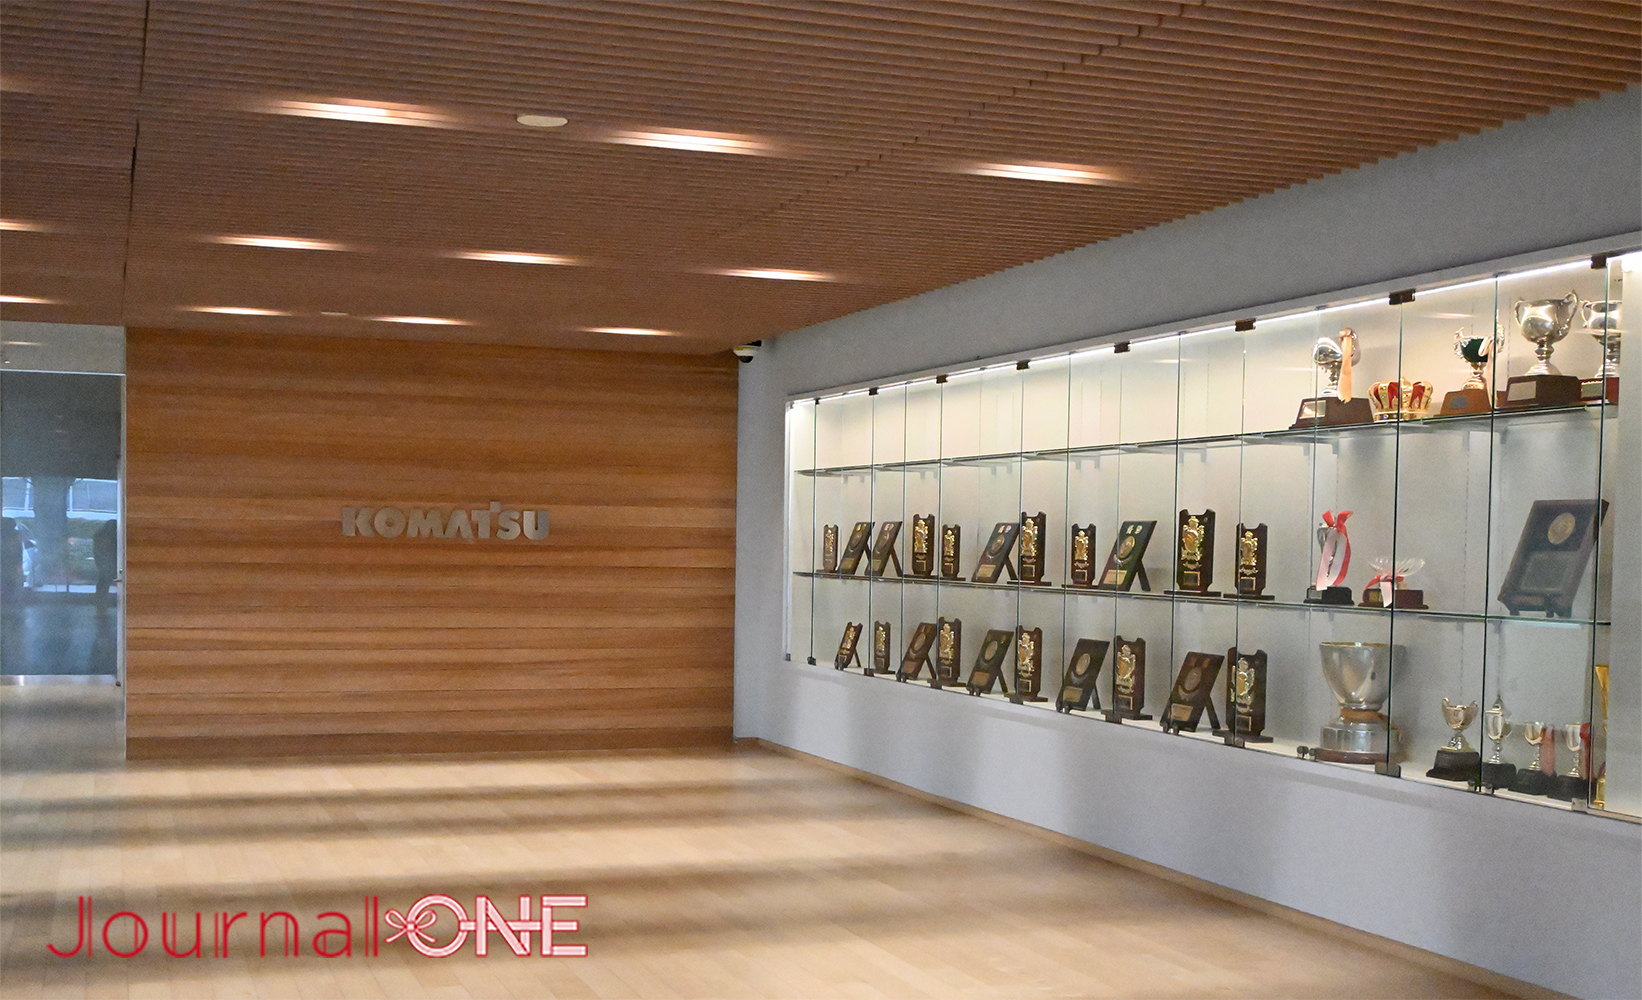 Journak-ONE | Many trophies displayed in the entrance hall of Sousi dojo